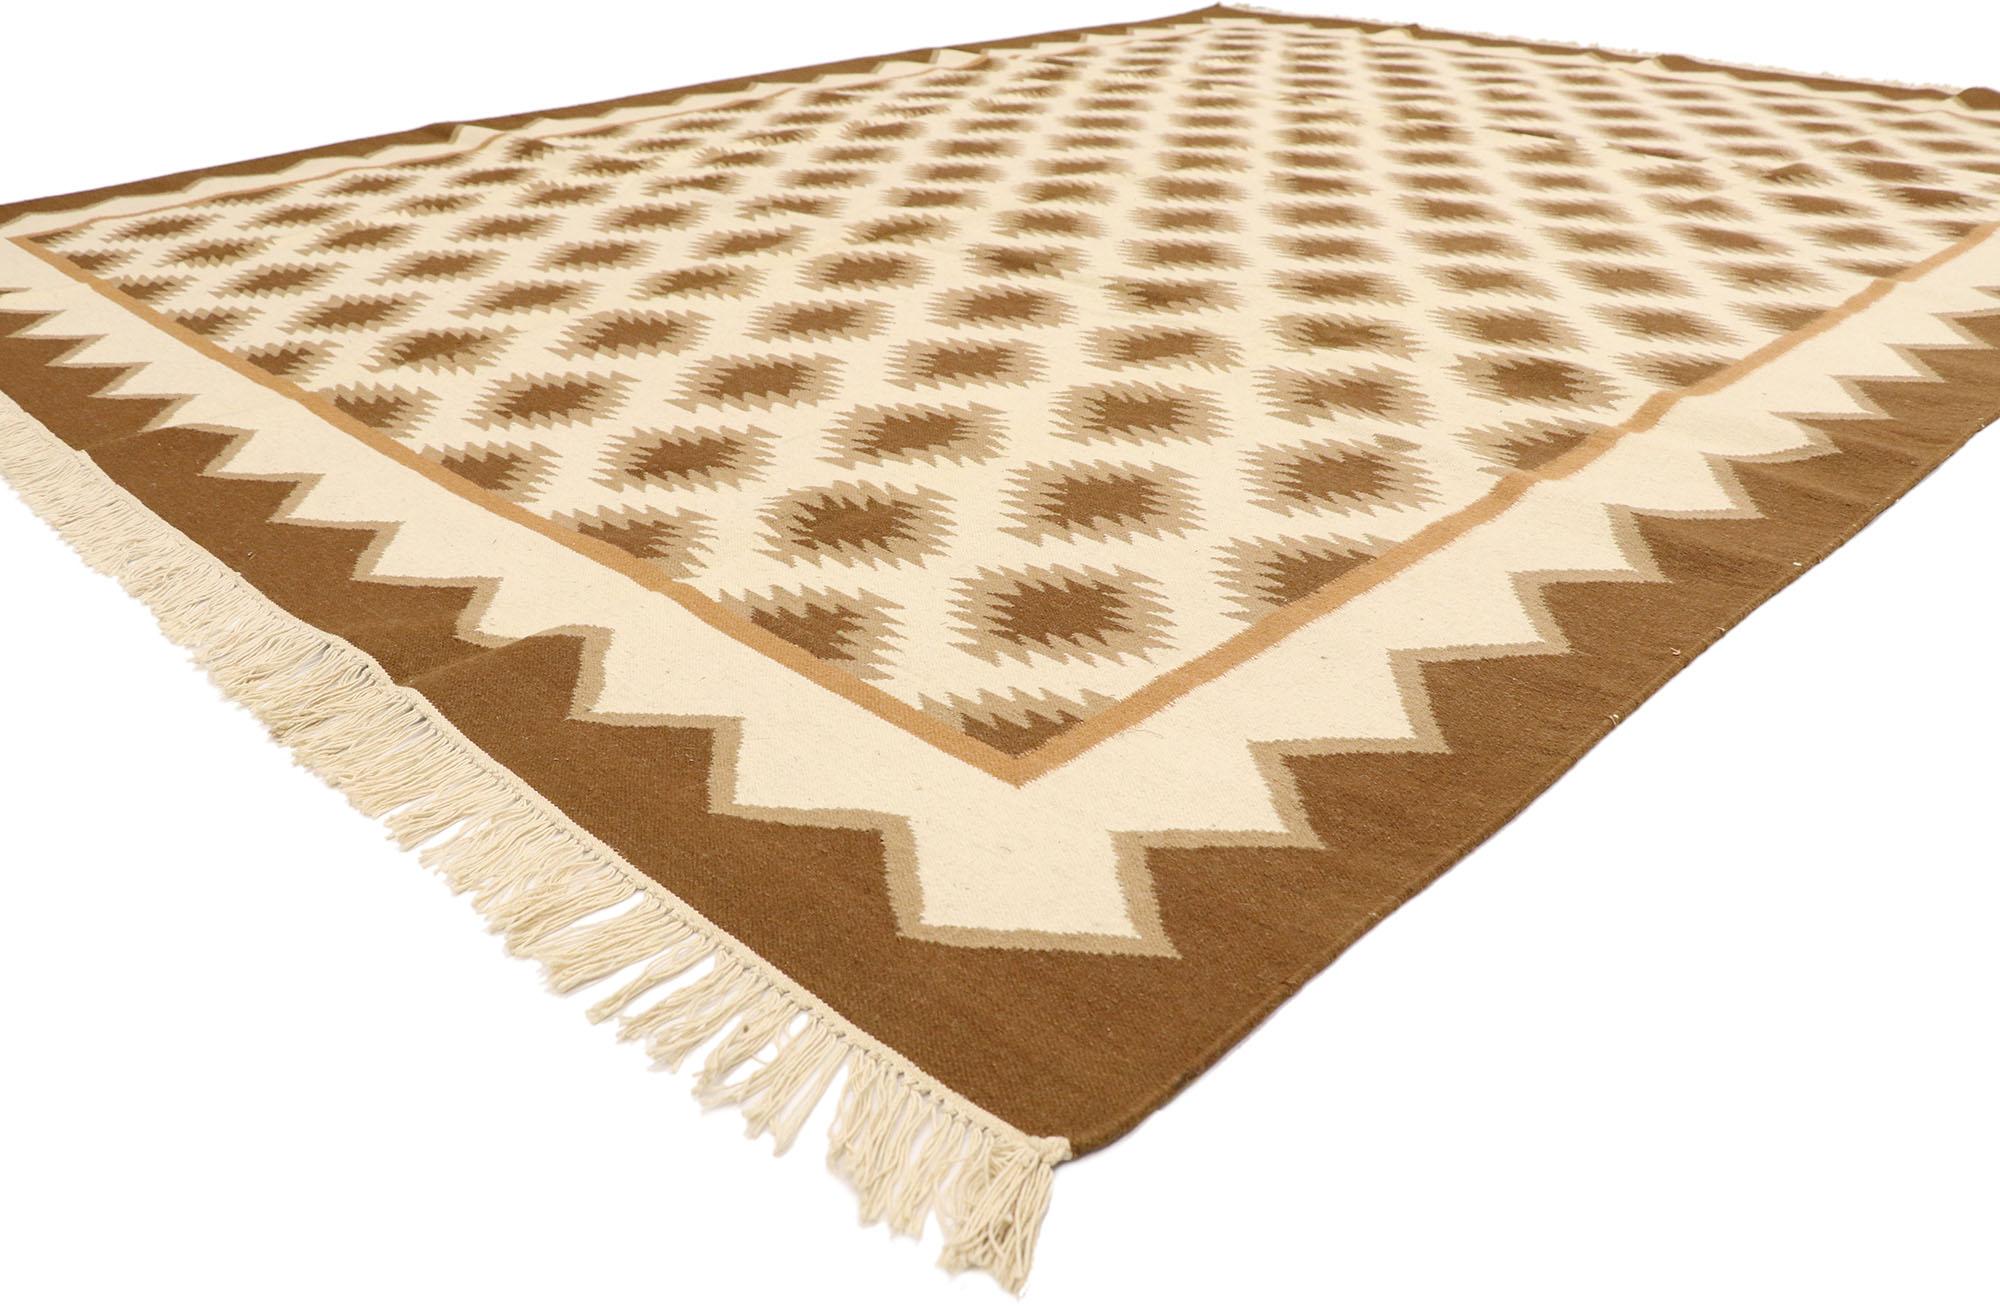 77964 Vintage Romanian Kilim Rug with Mid-Century Modern Style 09'01 x 12'00. Warm and inviting, this hand-woven wool vintage Romanian kilim rug features an all-over repeating geometric pattern. Rendered in variegated shades of beige, brown, camel,